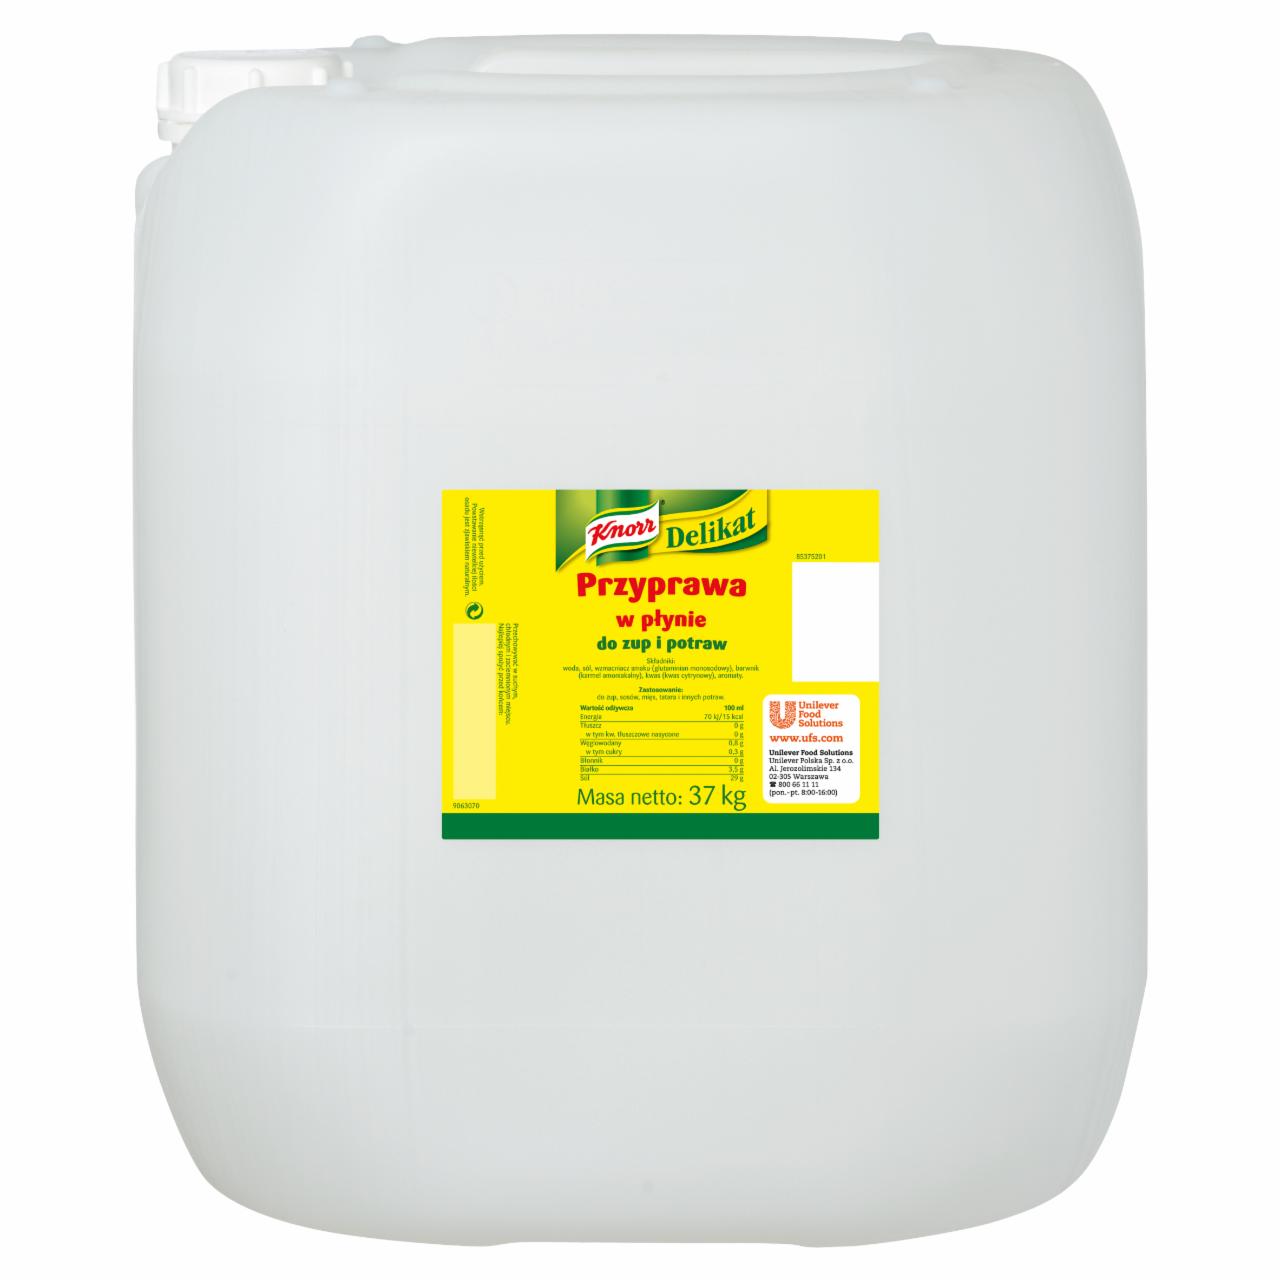 Photo - Knorr Delikat Soups and Dishes Liquid Seasoning 37 kg